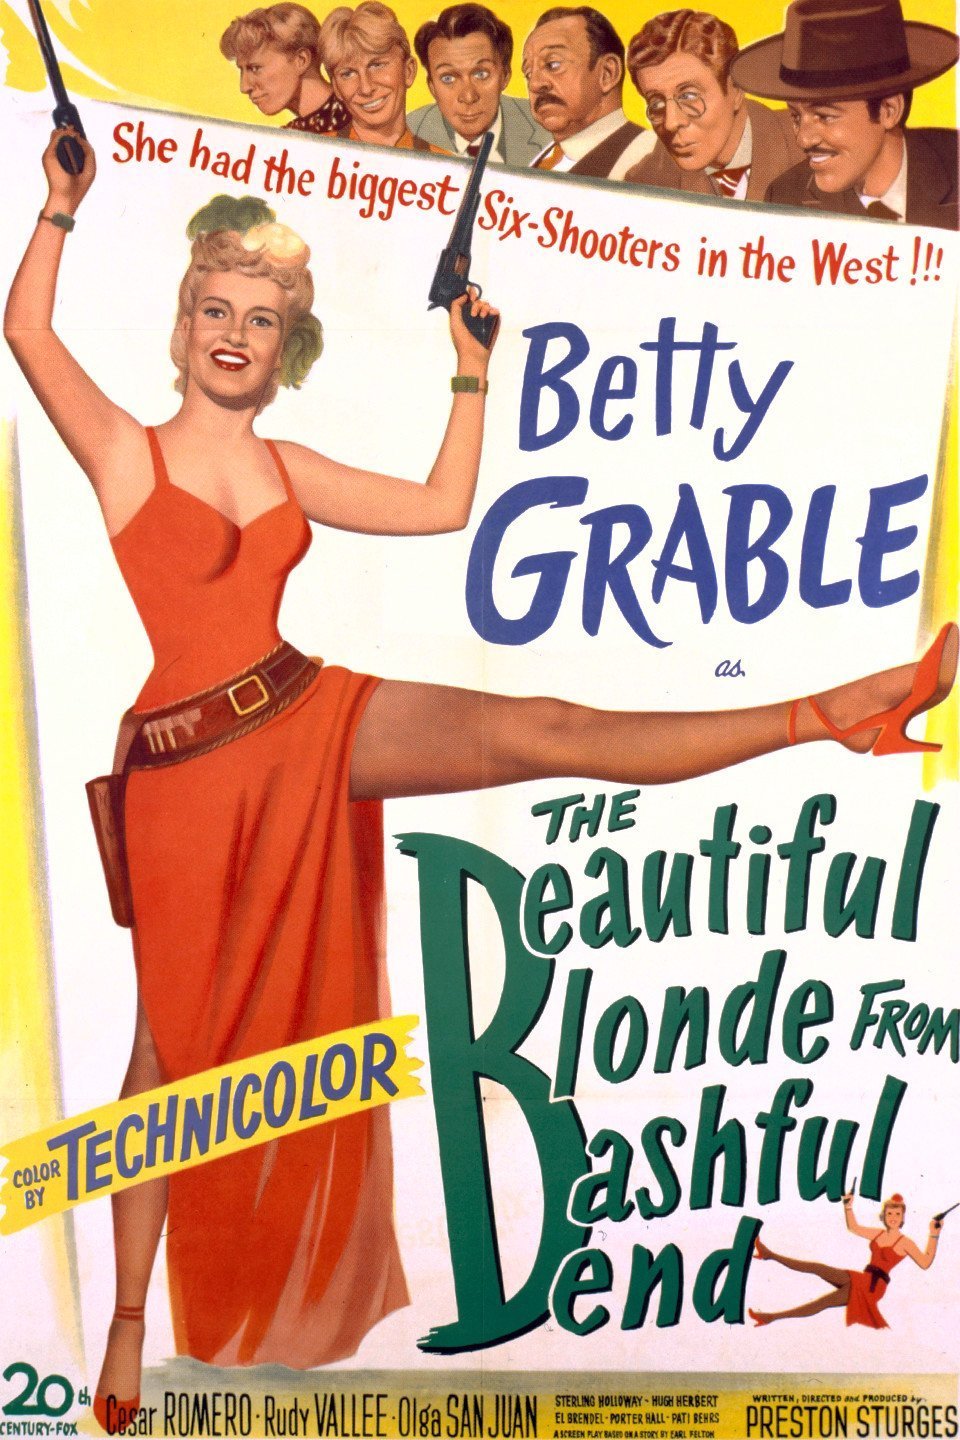 Poster of the movie The Beautiful Blonde from Bashful Bend